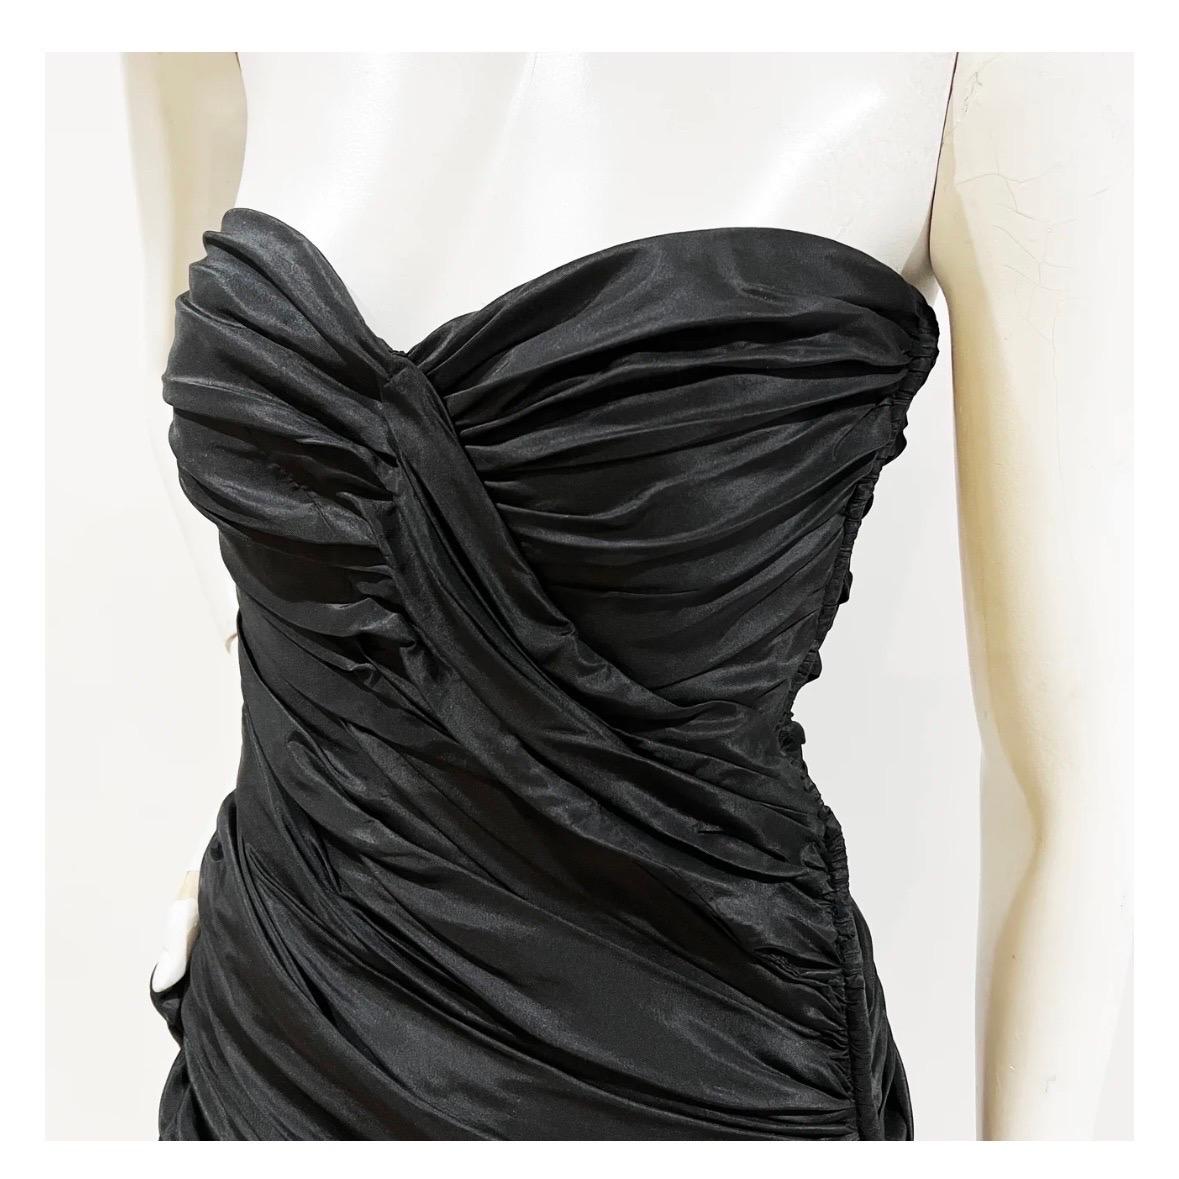 Vintage Strapless Gathered Dress by Vicky Tiel 
Circa 1980's
Made in France
Black 
Sweetheart neckline 
Gathered bodice with asymmetrical wrap effect
Decorative bow on right hip 
Internal waist strap 
Side zipper and hook closure  
Taffeta blend 